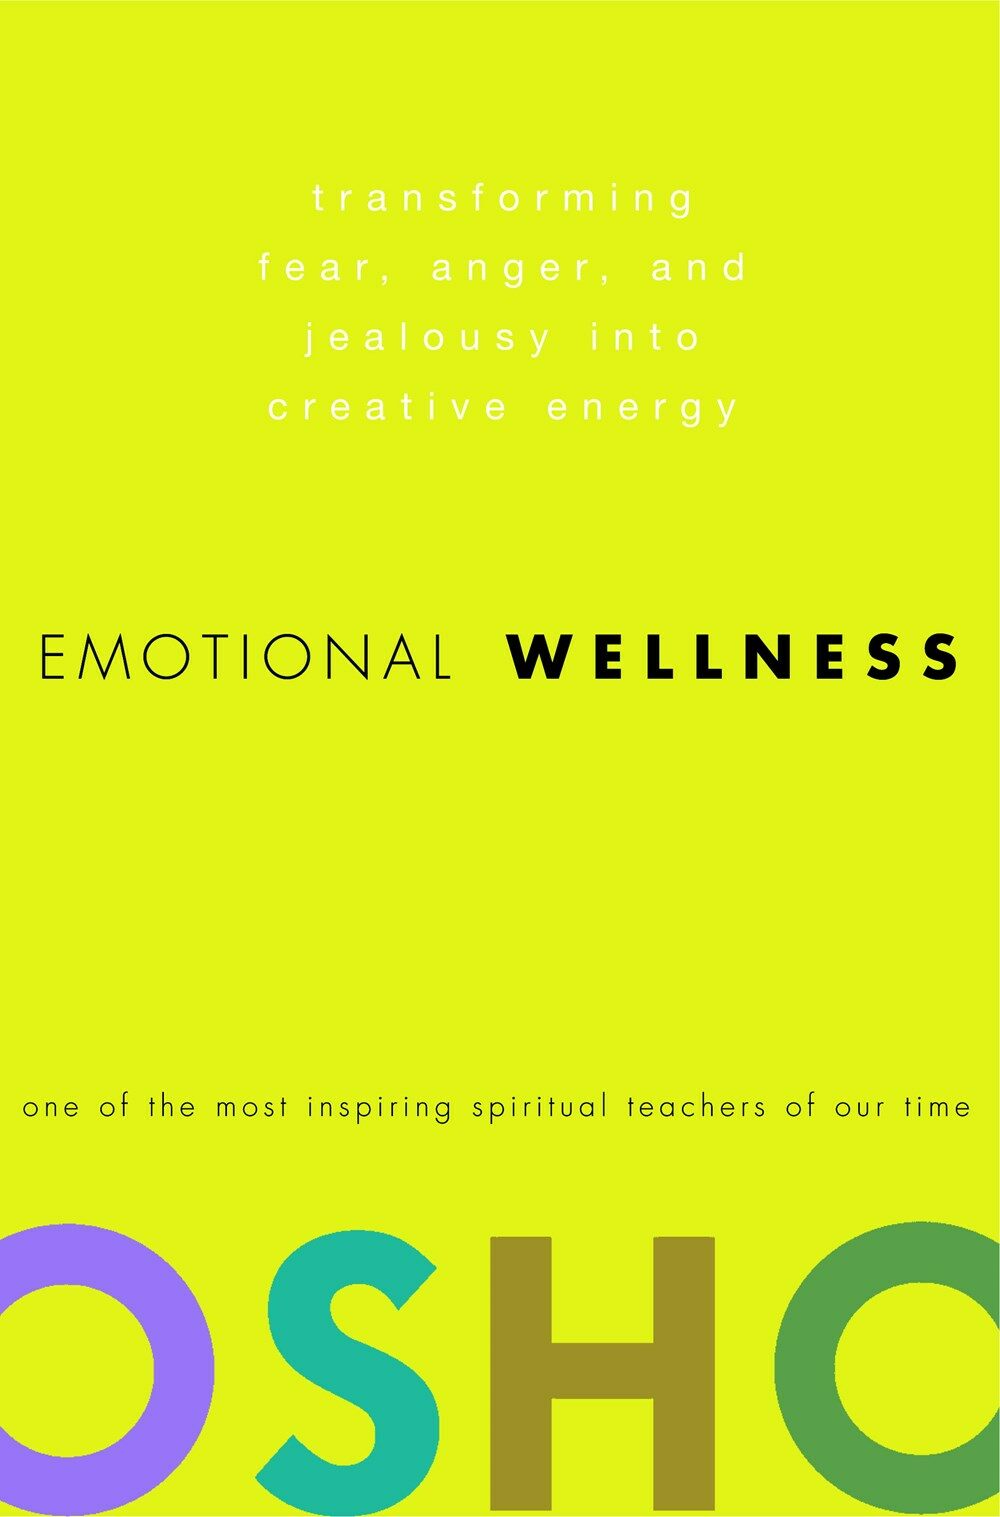 Emotional Wellness: Transforming Fear, Anger, and Jealousy Into Creative Energy (Hardcover)